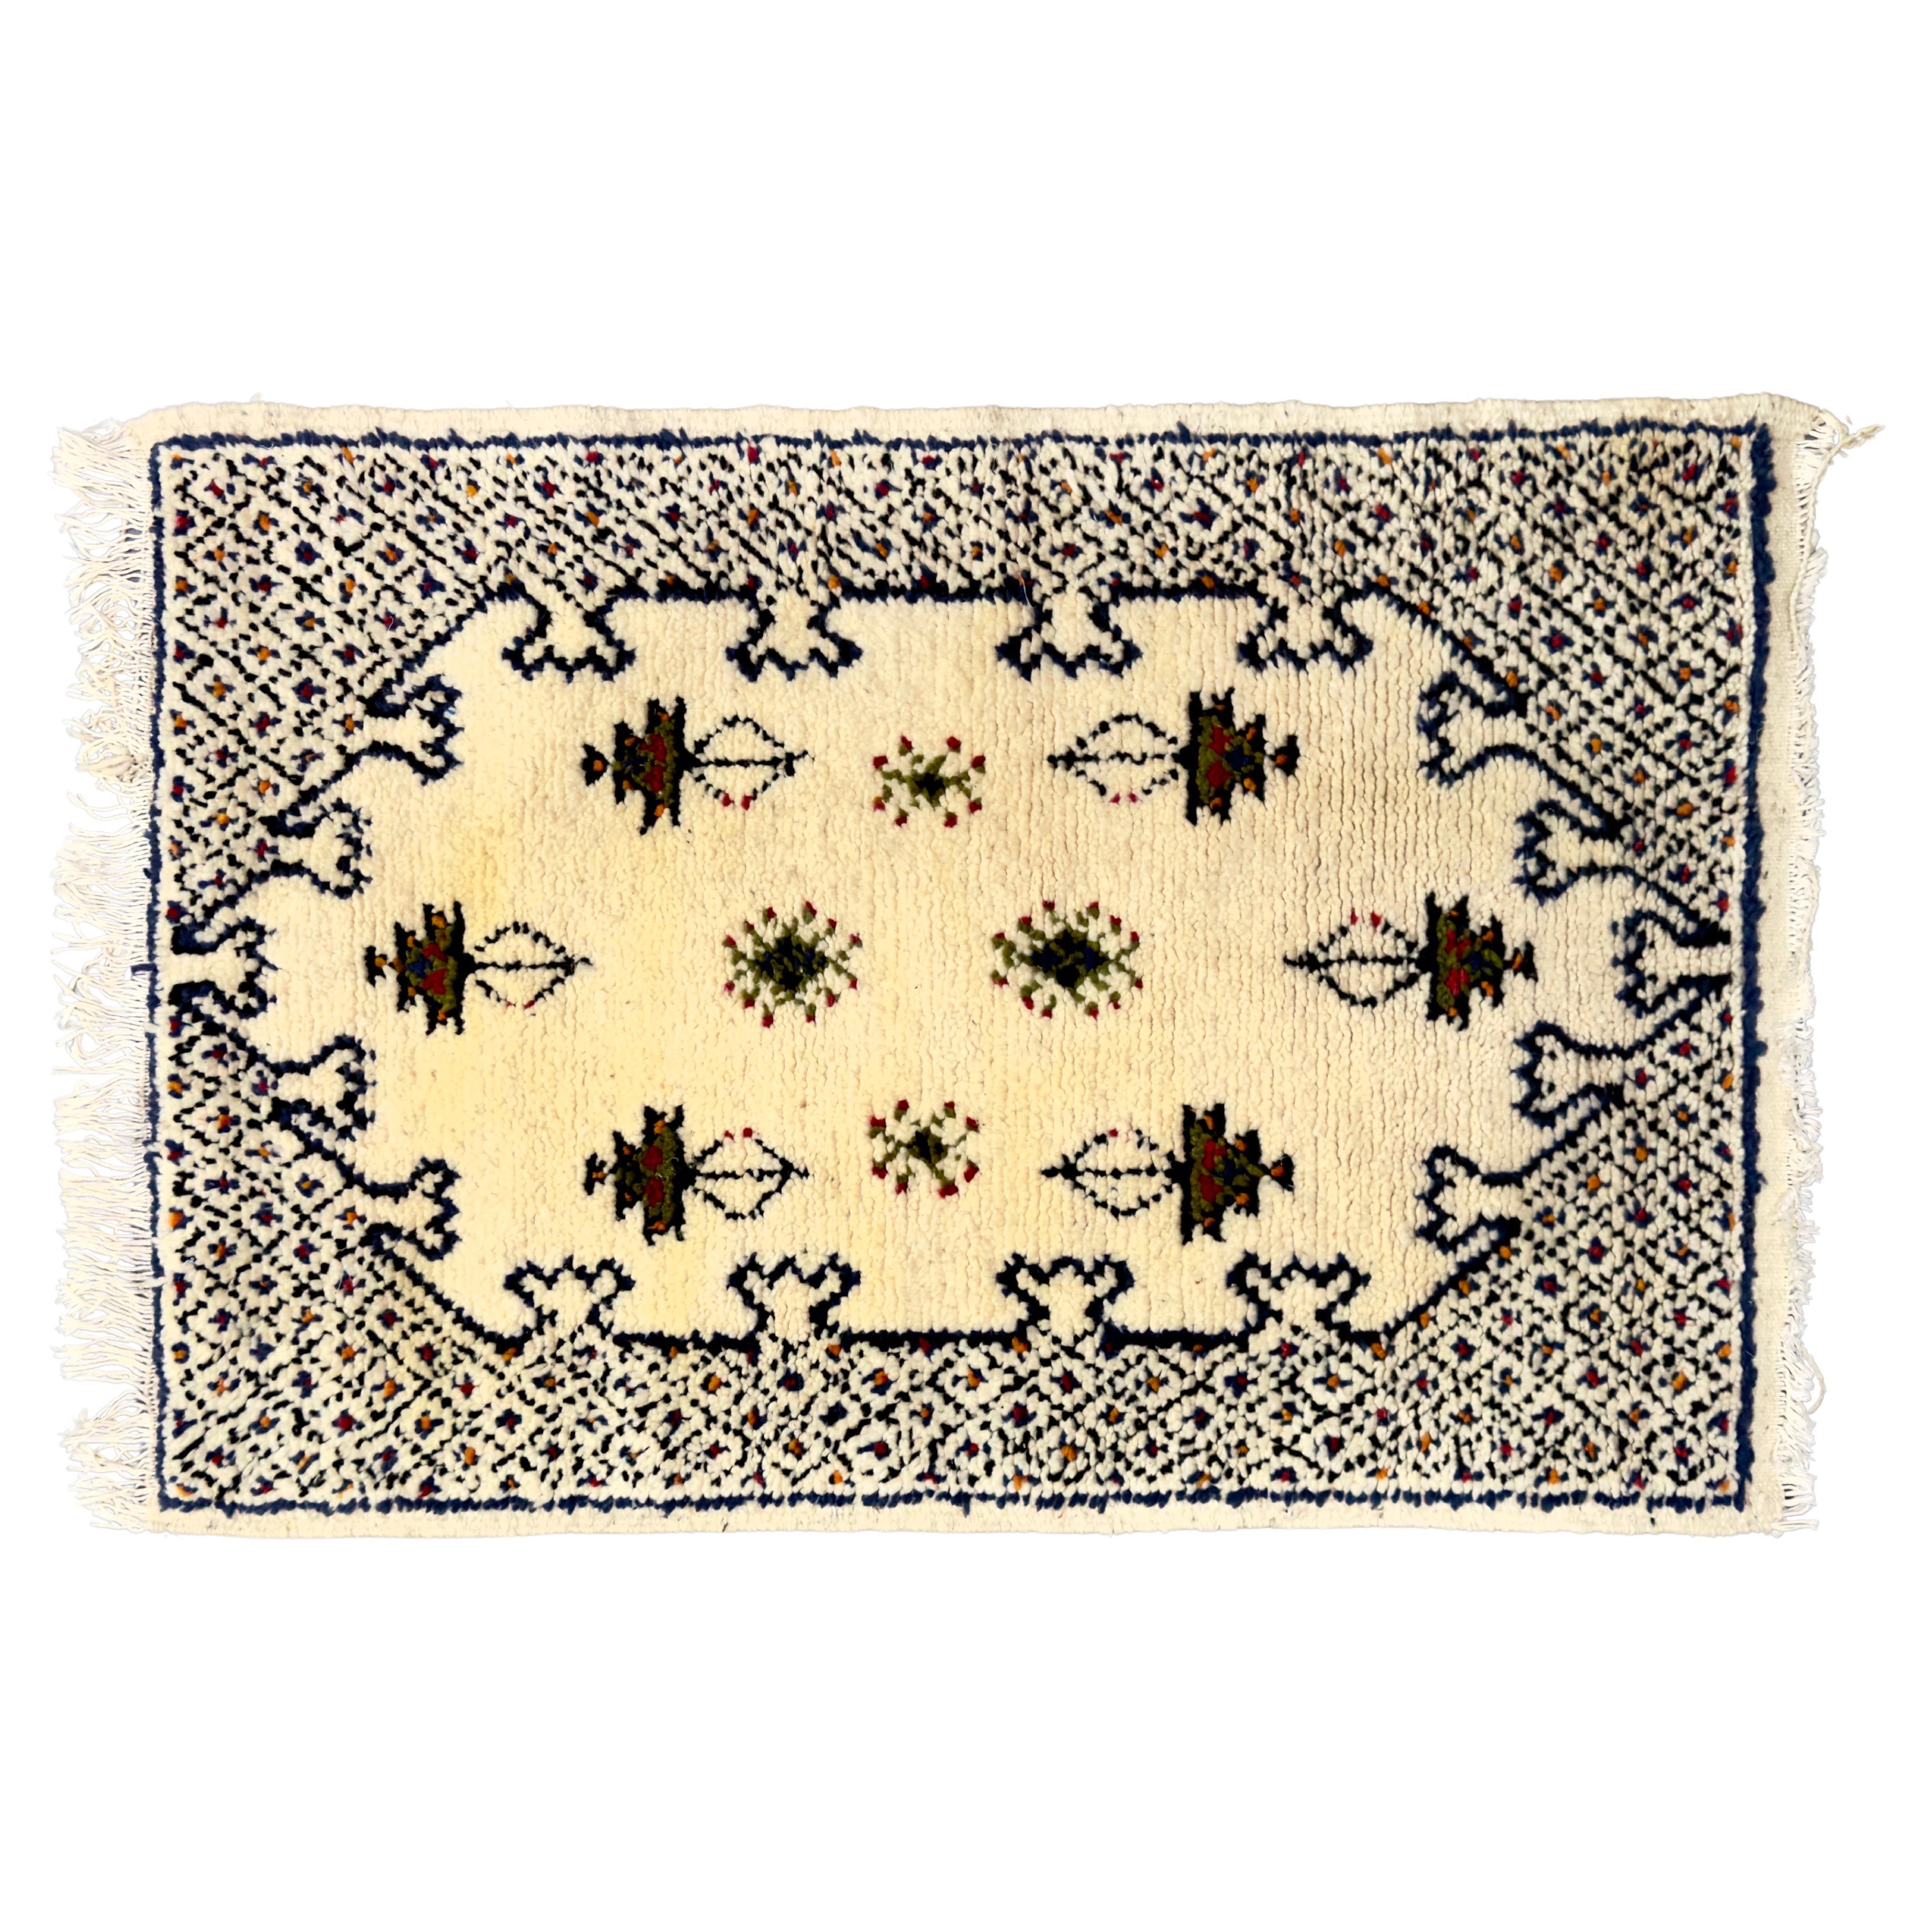 Boho Chic  Moroccan Small White & Black Wool Hand-Woven Rug or Carpet  For Sale